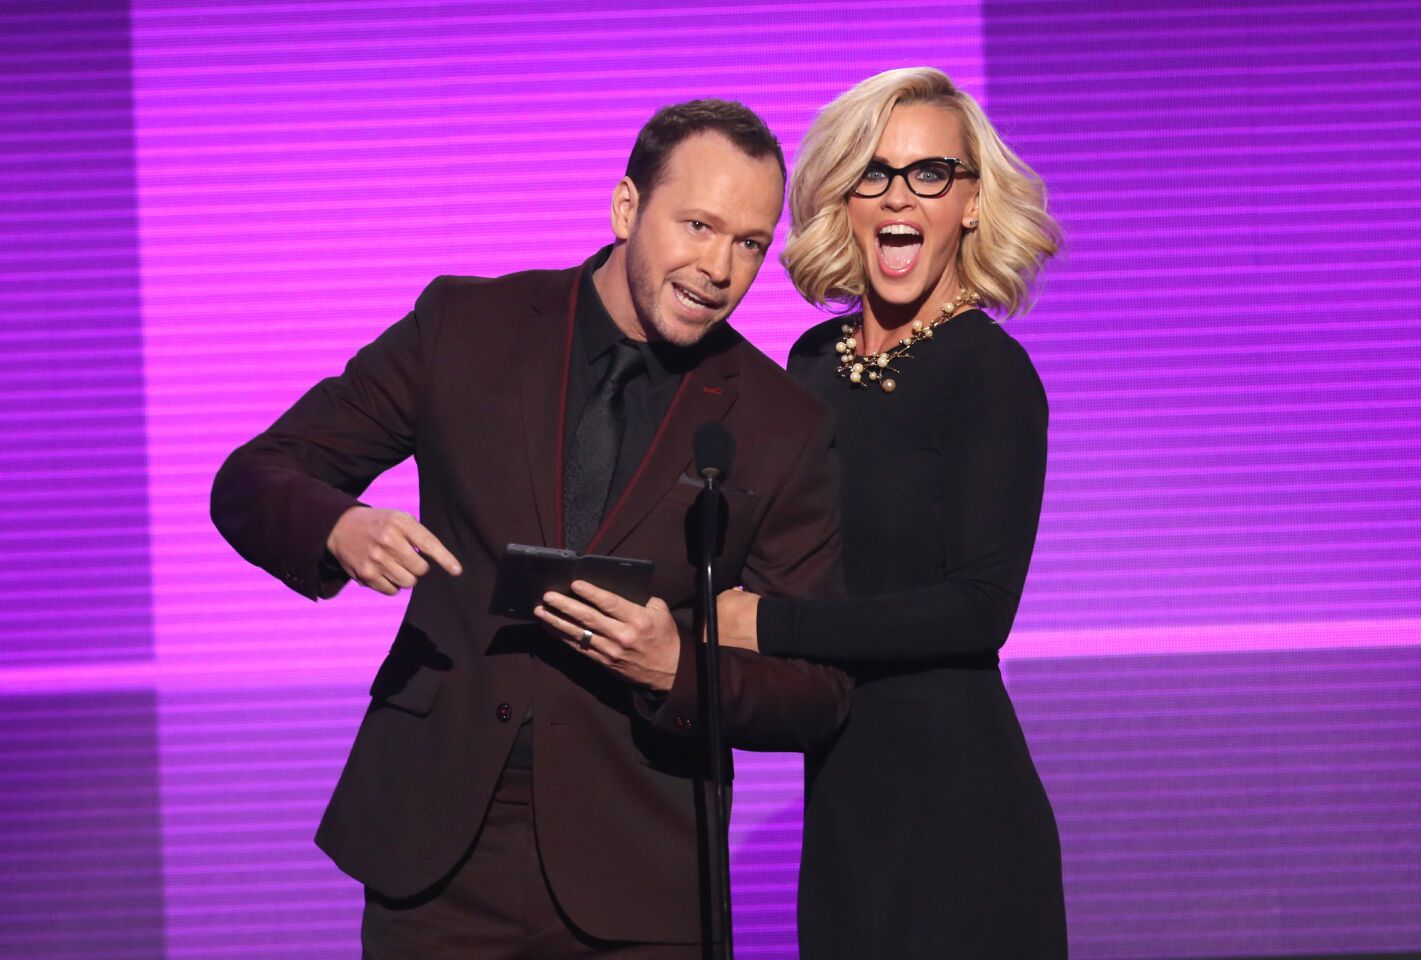 Donnie Wahlberg and Jenny McCarthy present the award for favorite pop/rock album.